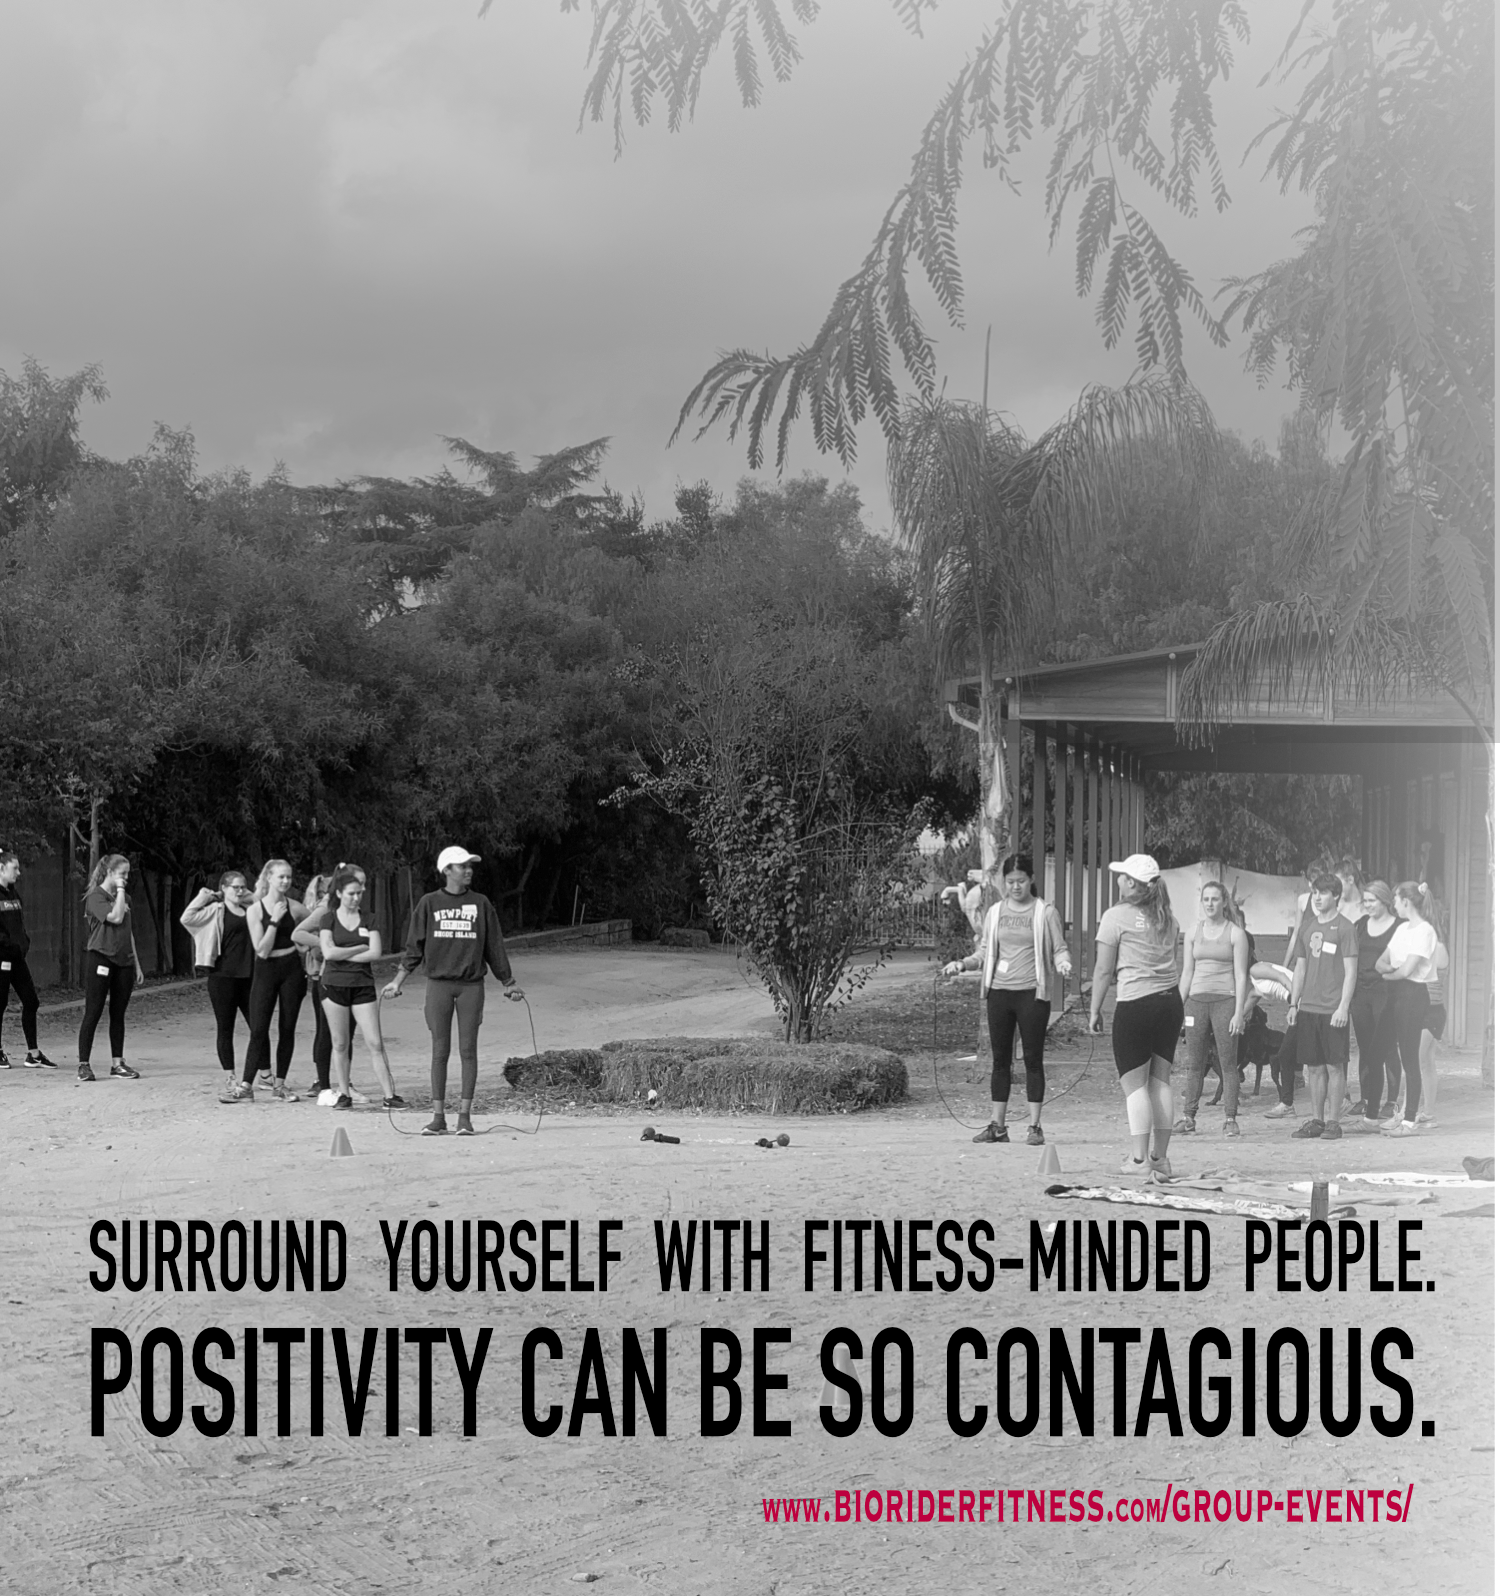 Group Fitness.Positivity Can be Contagious